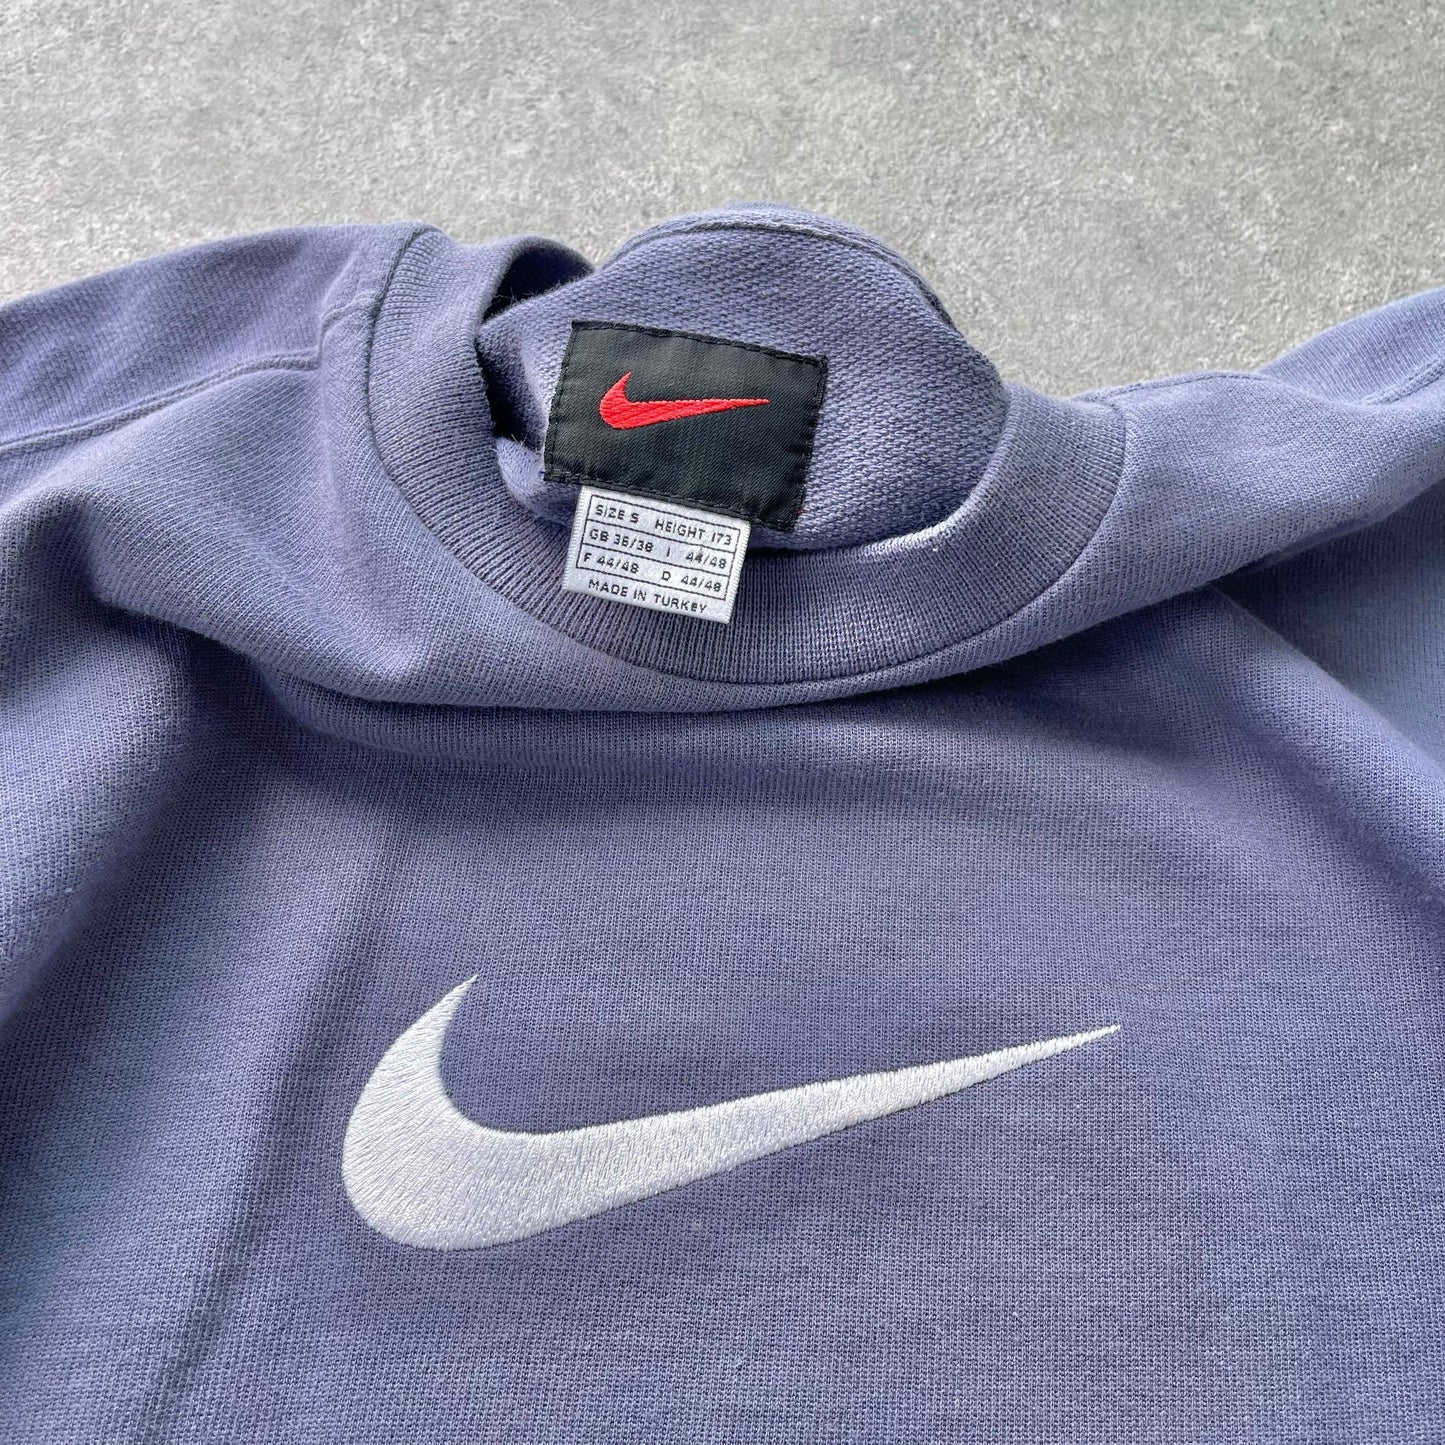 Nike 1990s heavyweight embroidered sweatshirt (M) - Known Source